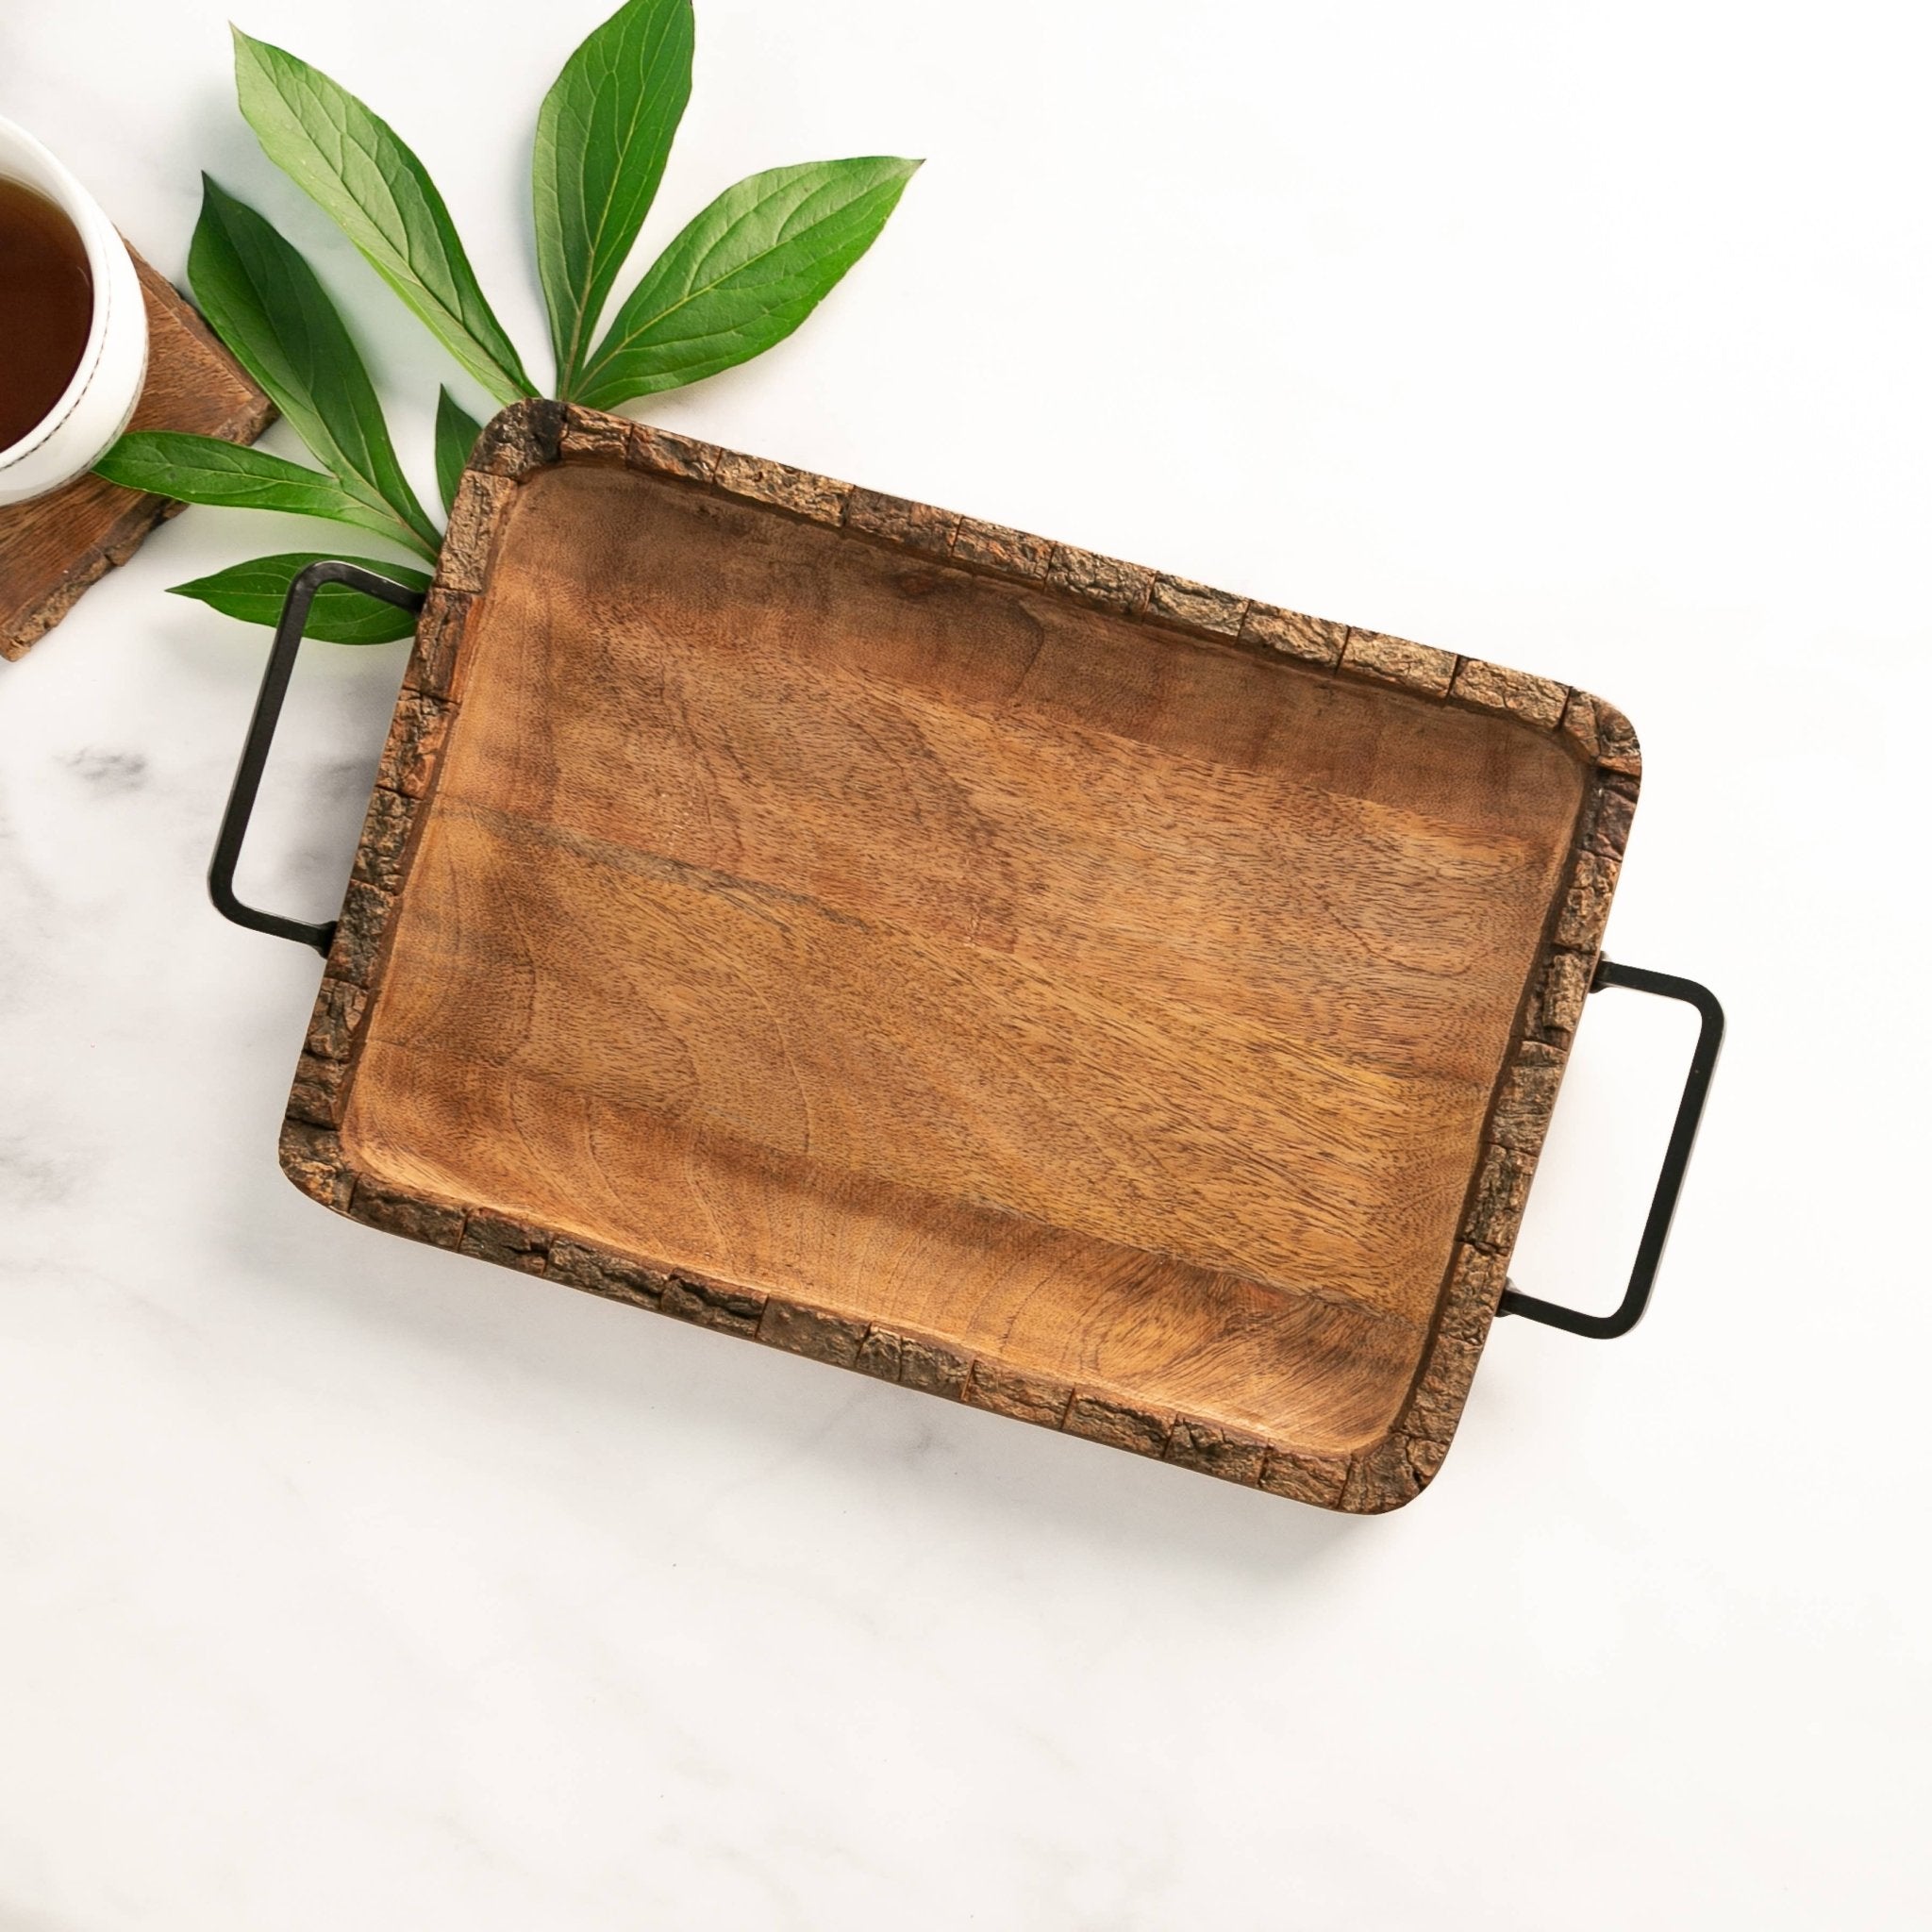 Mango Wood Charcuterie Serving Tray - Homeboxed